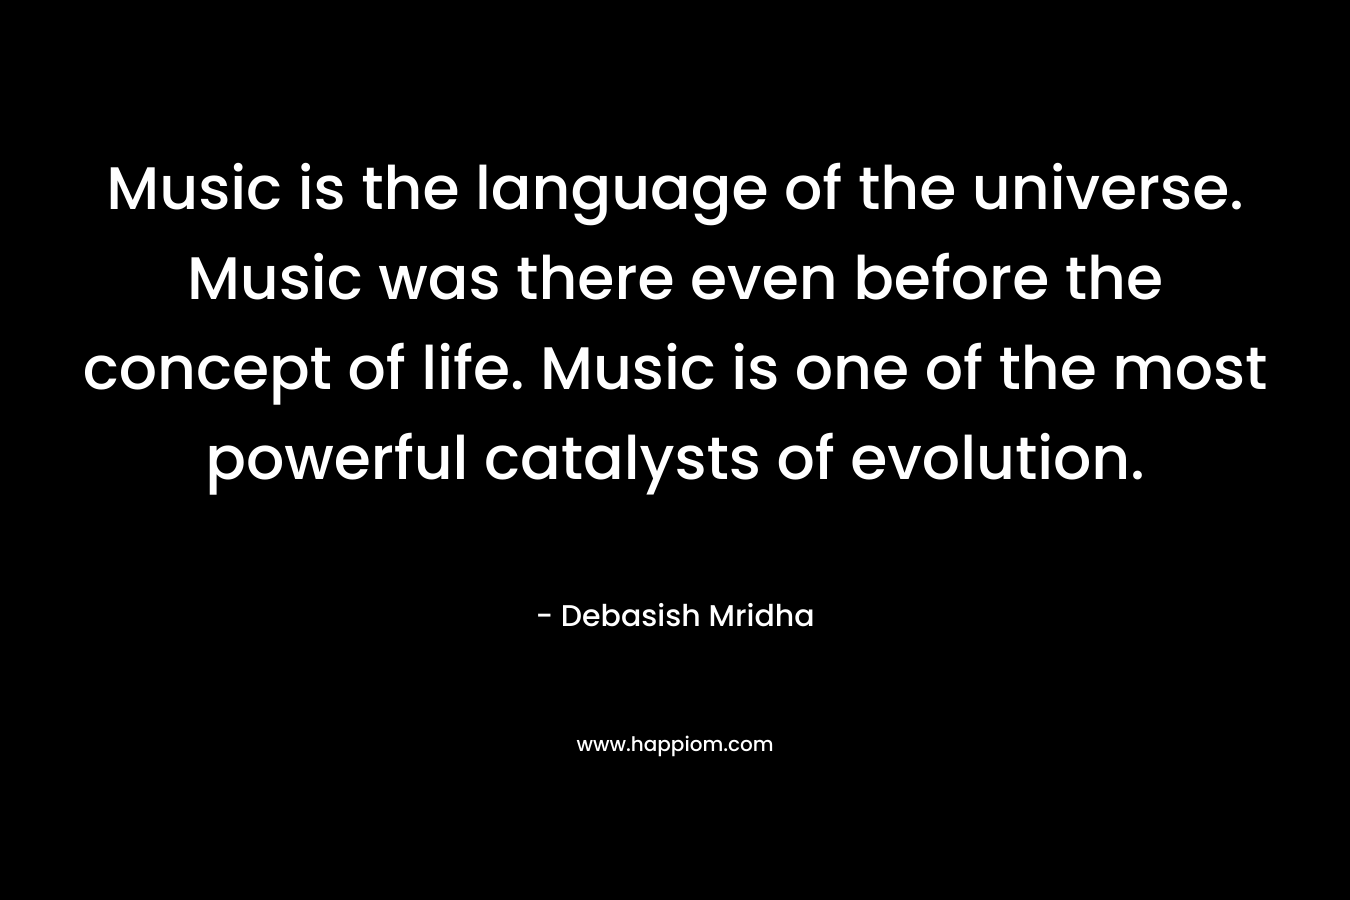 Music is the language of the universe. Music was there even before the concept of life. Music is one of the most powerful catalysts of evolution. – Debasish Mridha